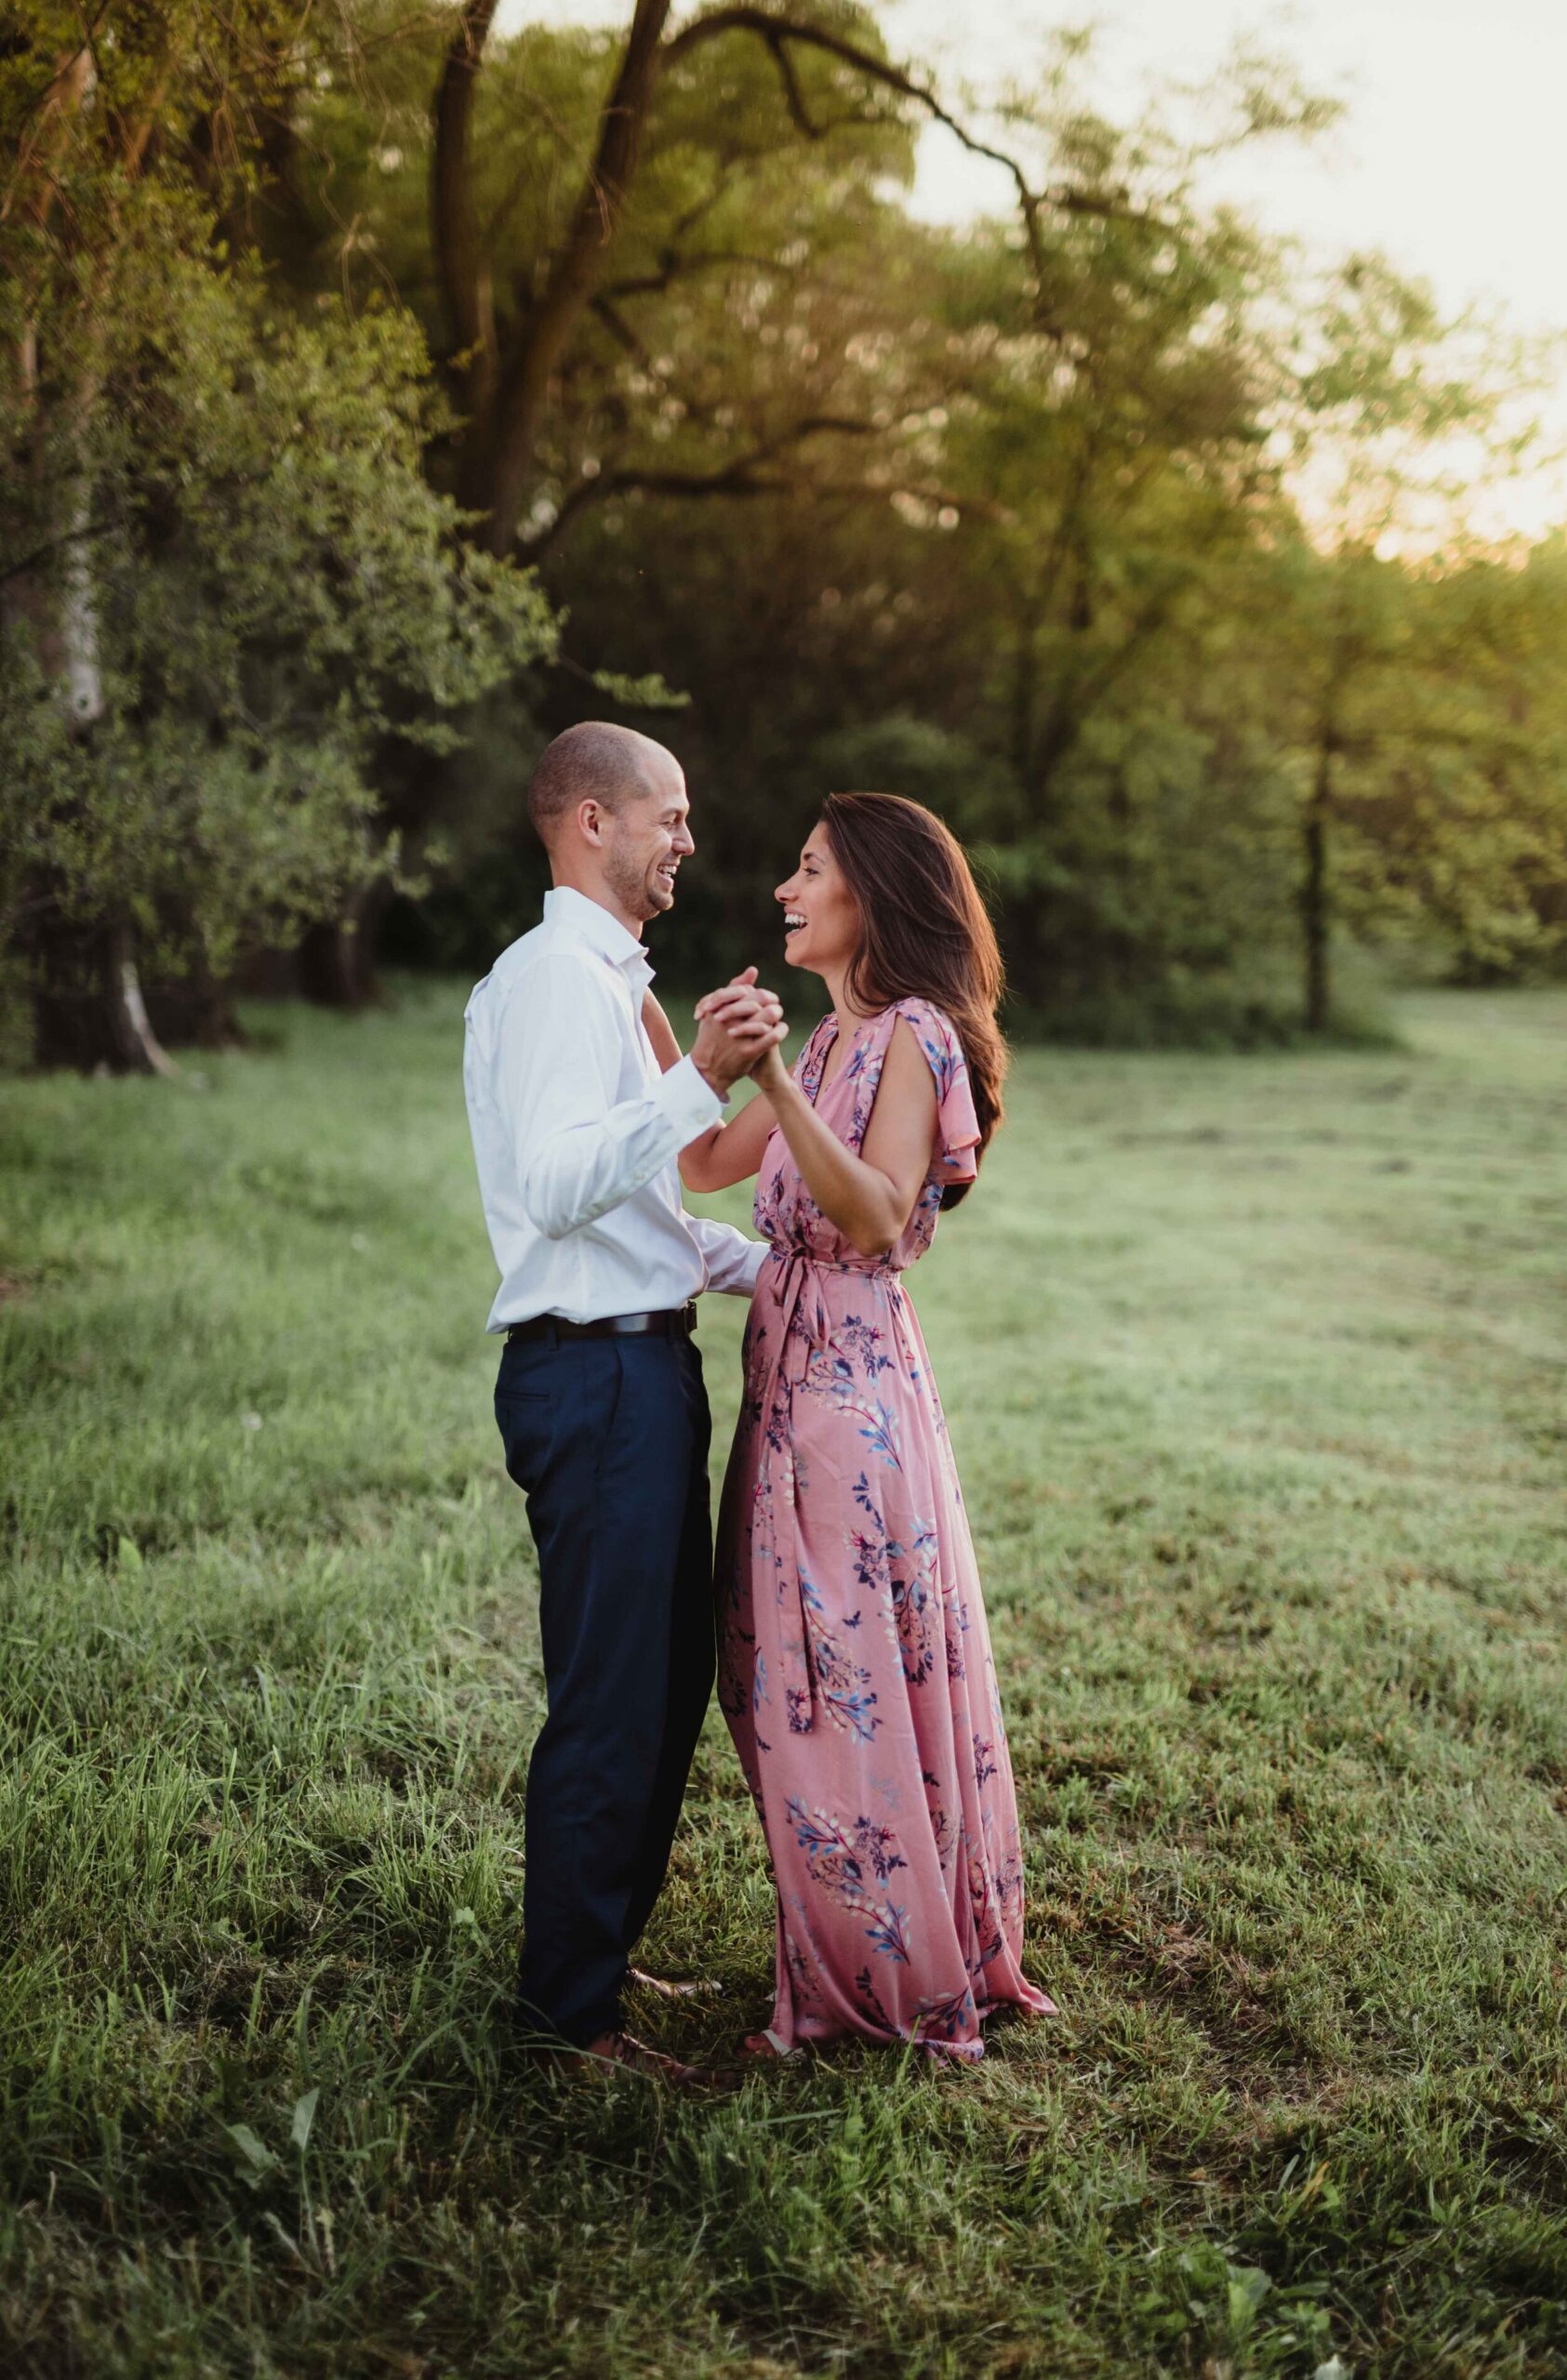 what should I wear for engagement photos?